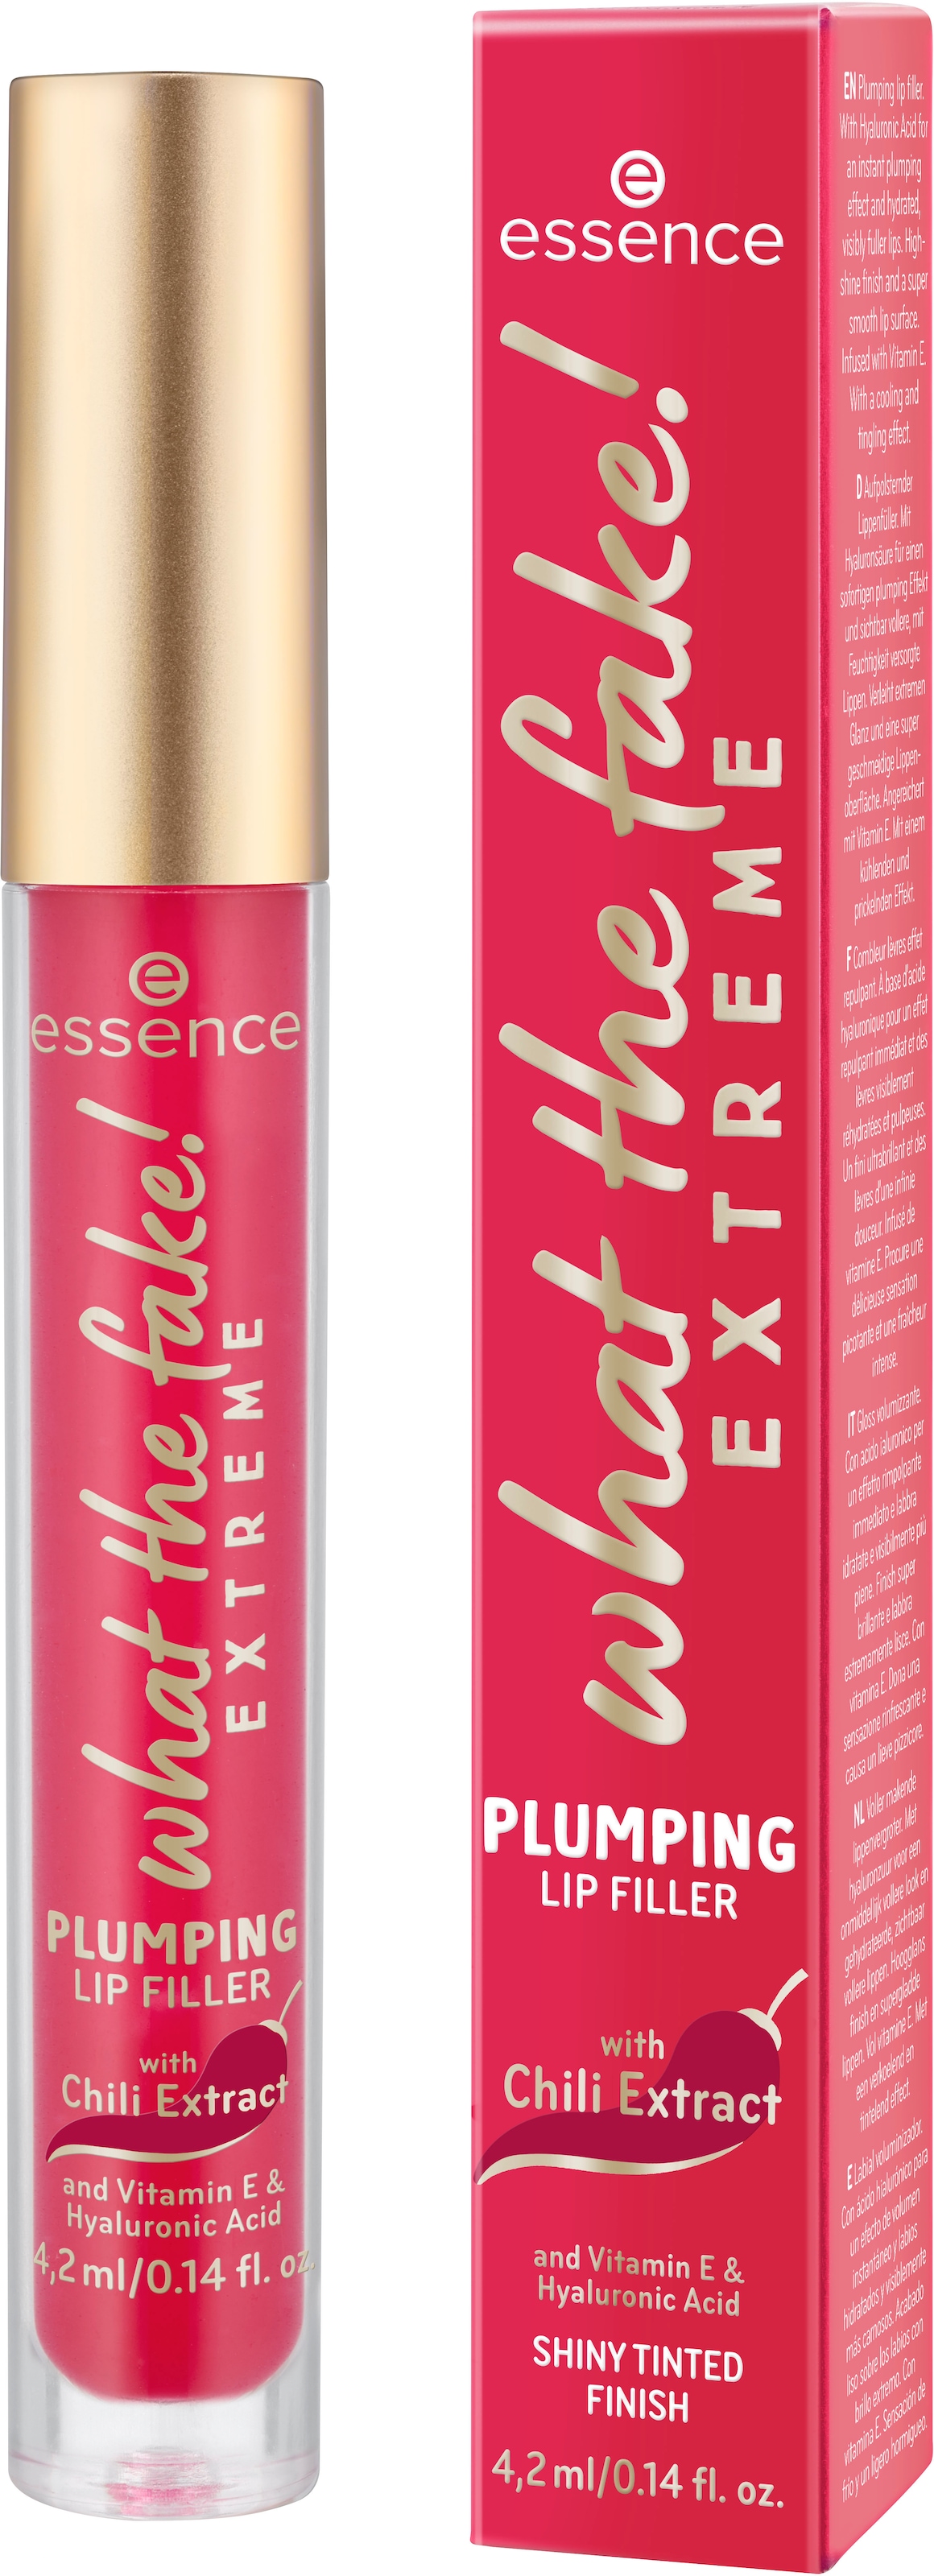 verkaufe gut Essence Lip-Booster 3 the PLUMPING OTTO LIP (Set, FILLER«, tlg.) bei »what EXTREME fake